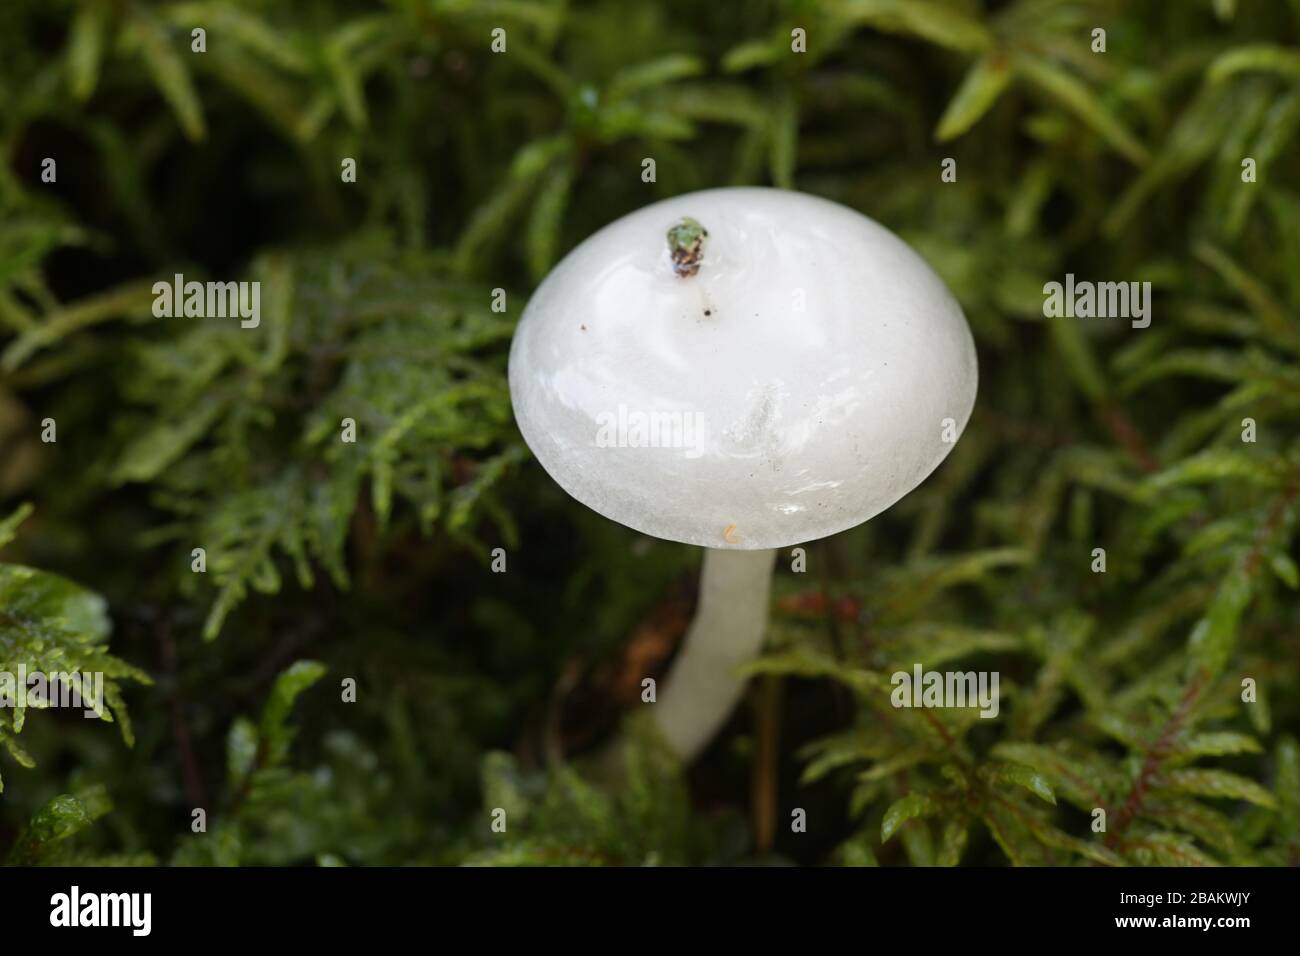 Hygrophorus piceae, white woodwax mushroom from Finland Stock Photo